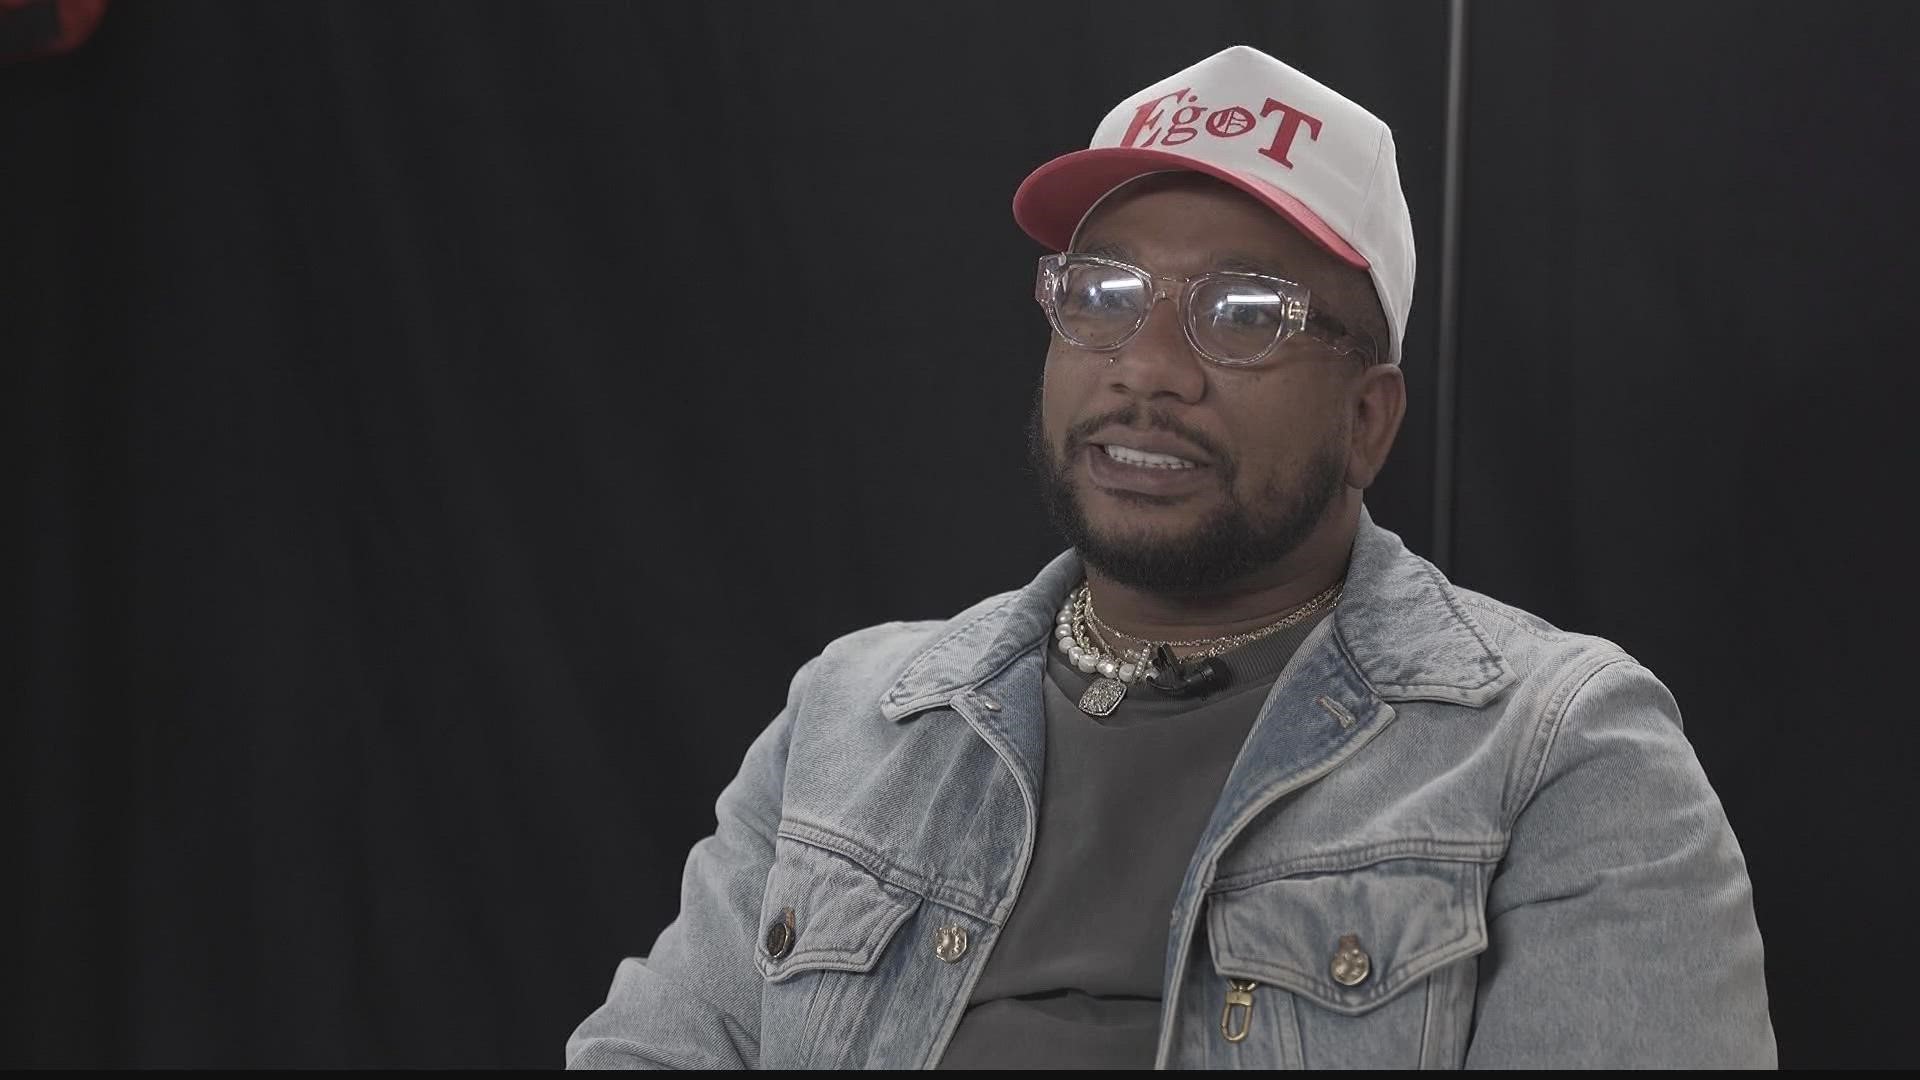 Seven-time Grammy-nominee and Atlanta-based rapper CyHi Da Prynce recently released his brand new album, EGOT the EP, on June 3.